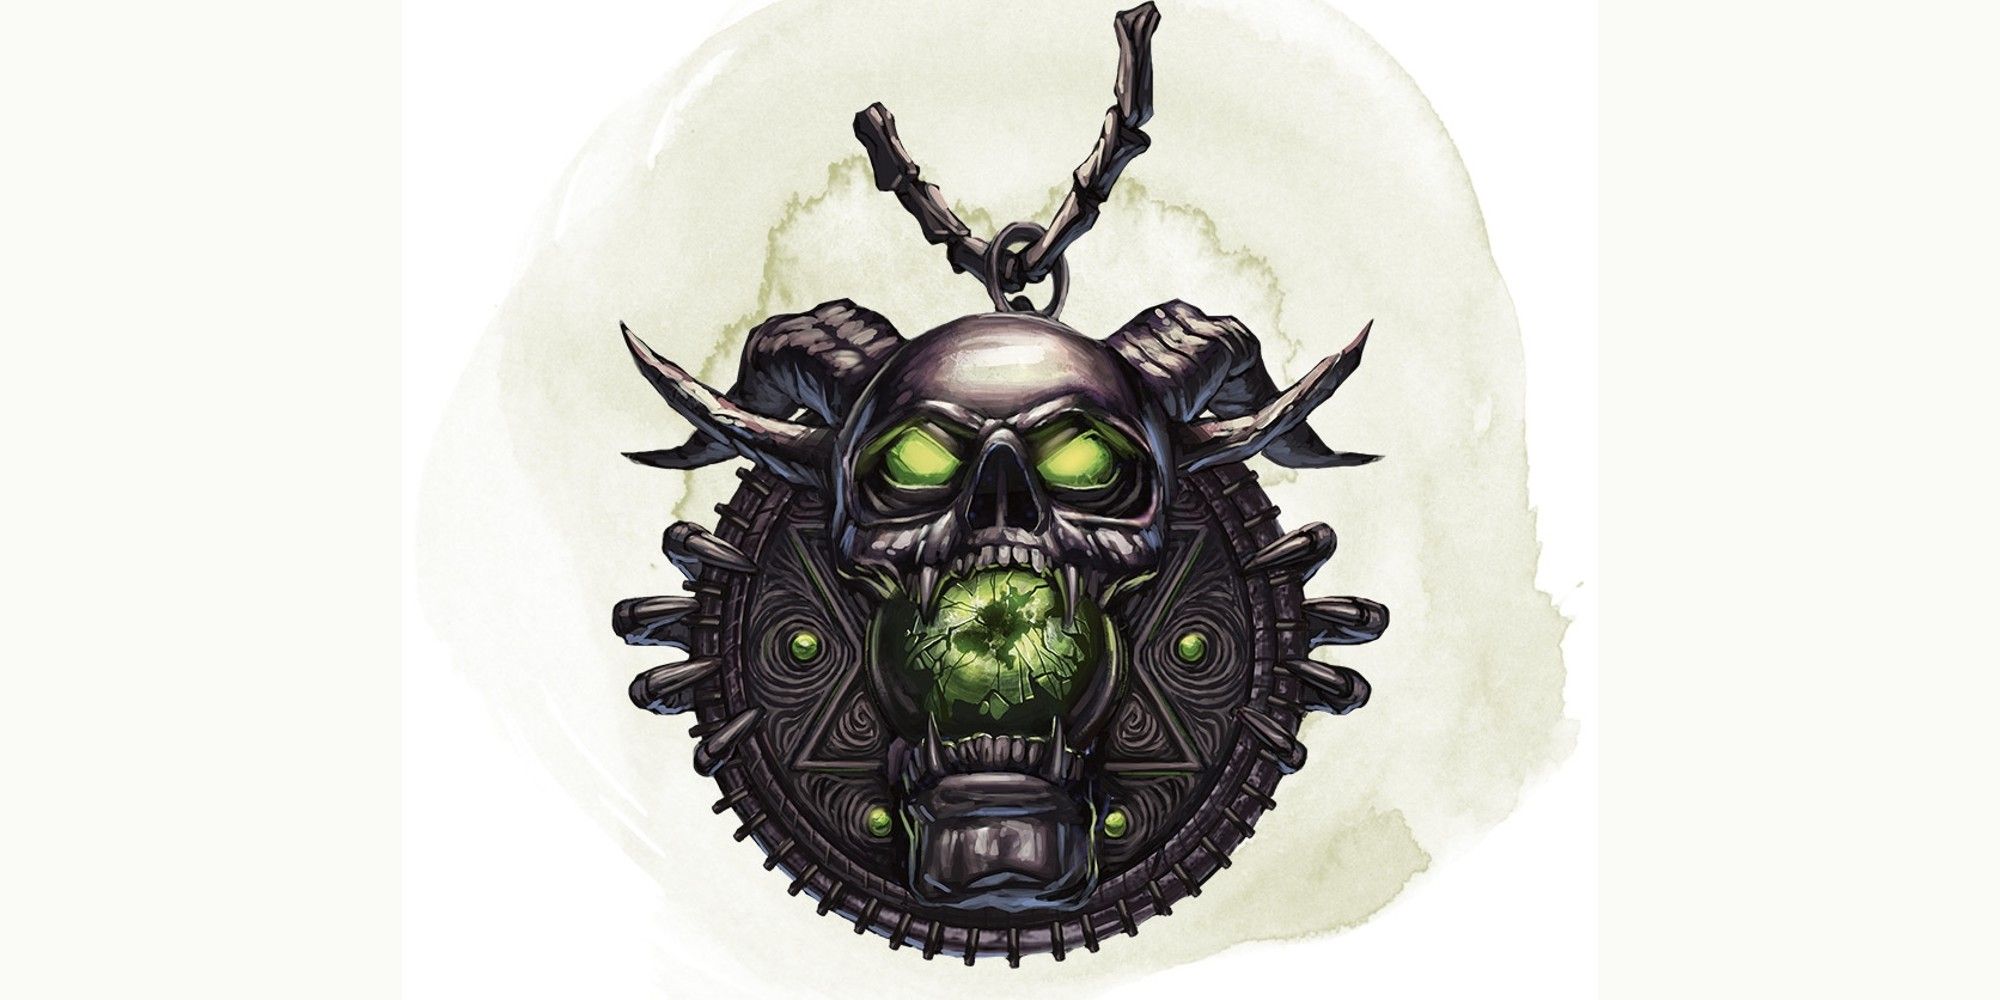 D&D's Talisman Of Ultimate Evil, it's a metal circle with a horned skull in the middle, the skull's eyes and mouth have a green glow.